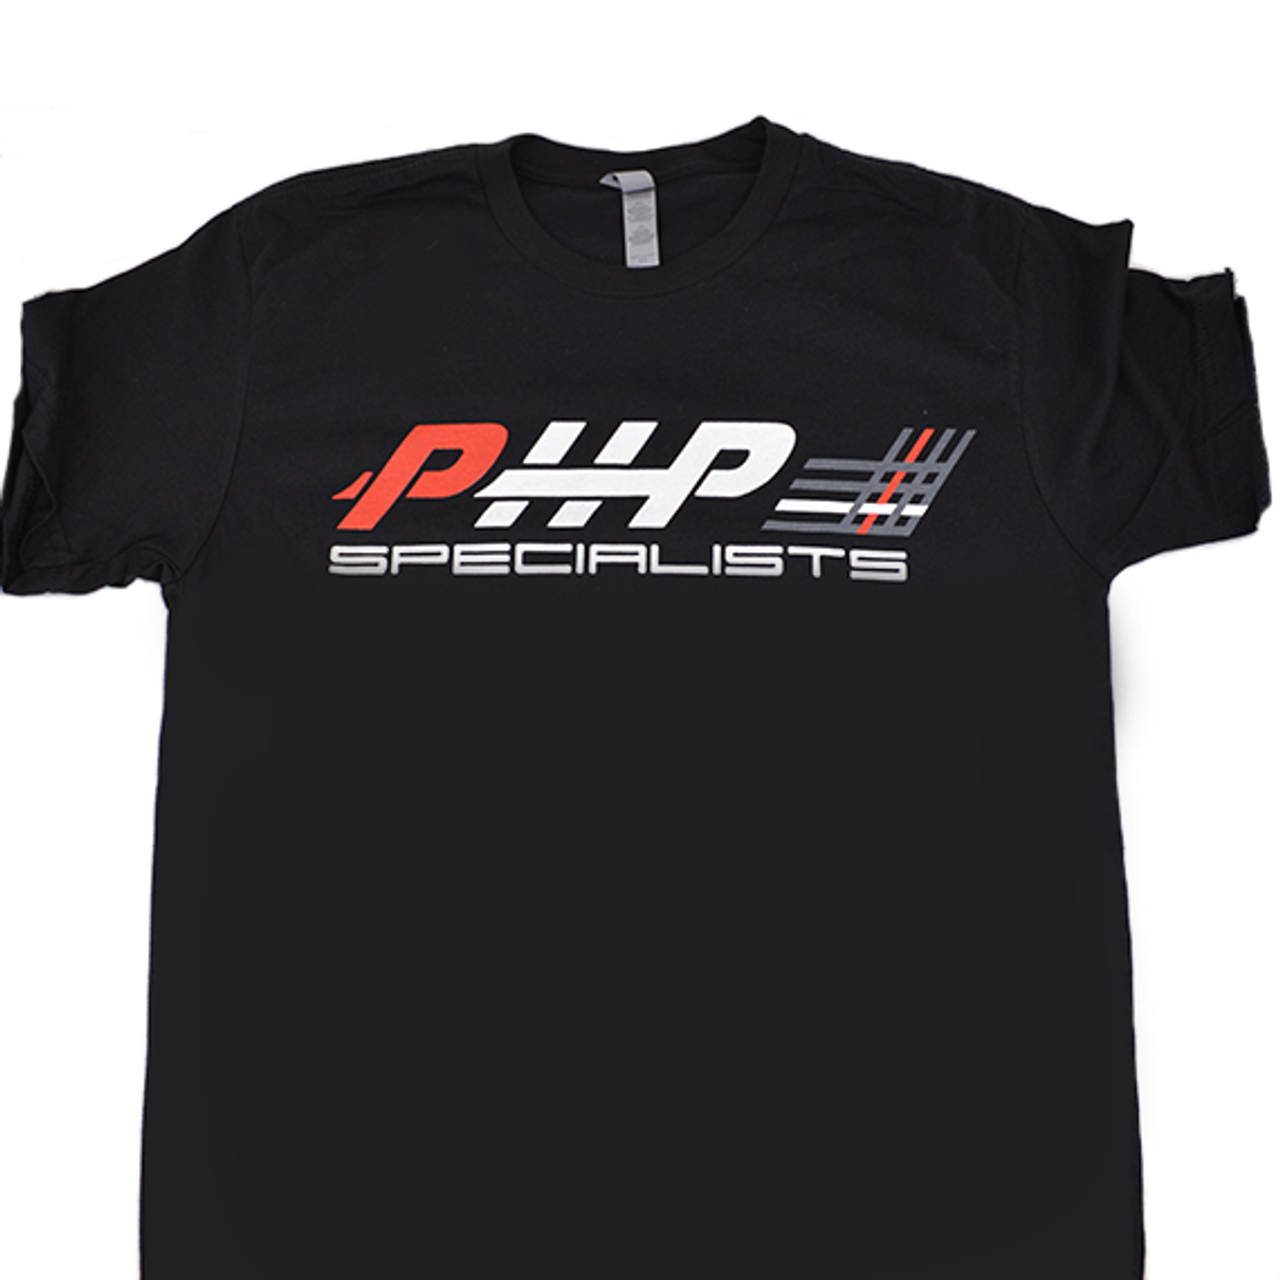 PHP Specialists T-shirt - Dispersion